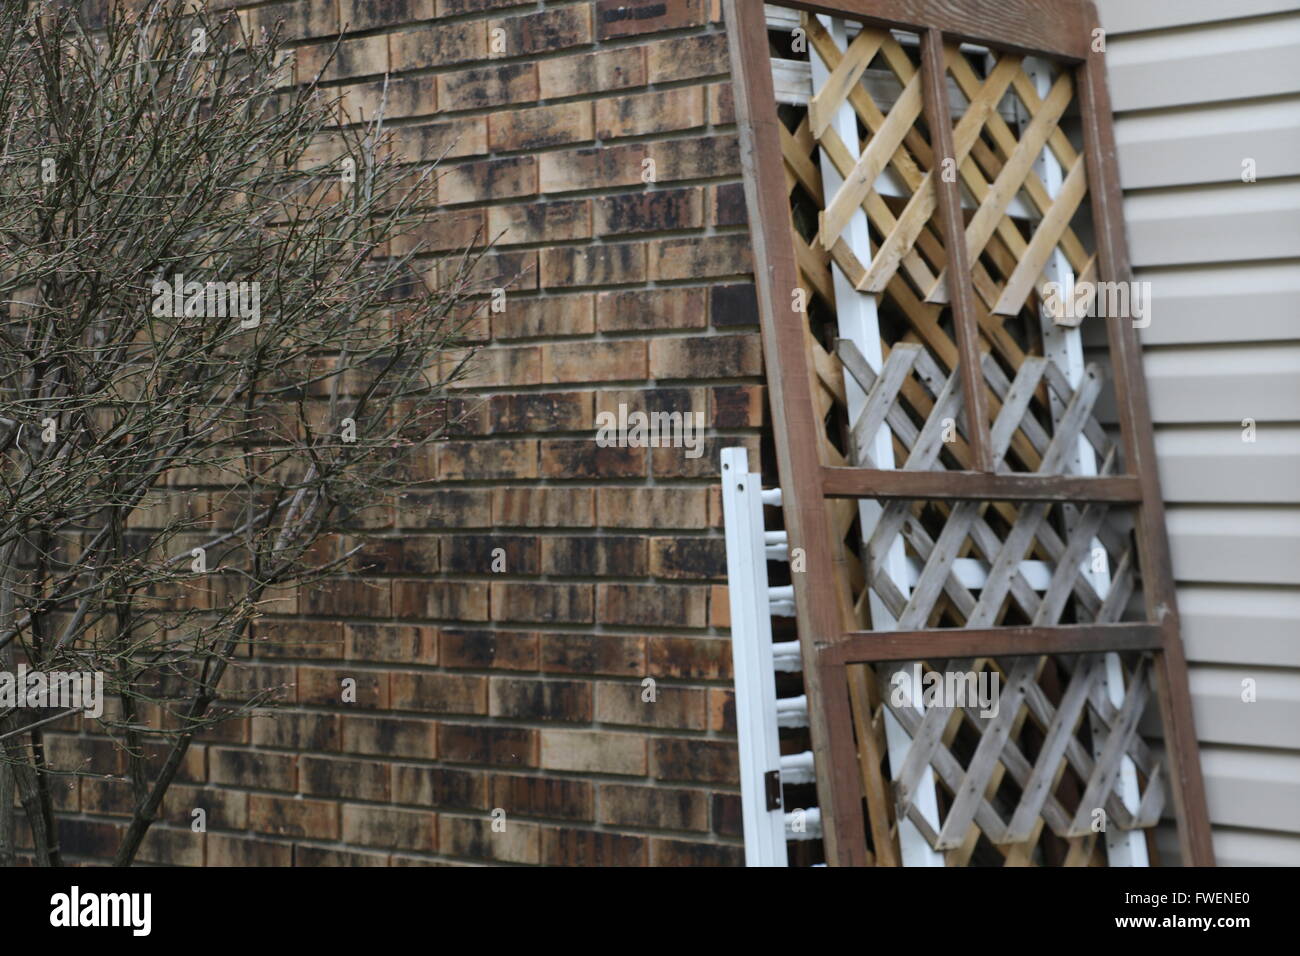 Criss-crossed wood paneling leans against a brick-walled house in winter. Stock Photo